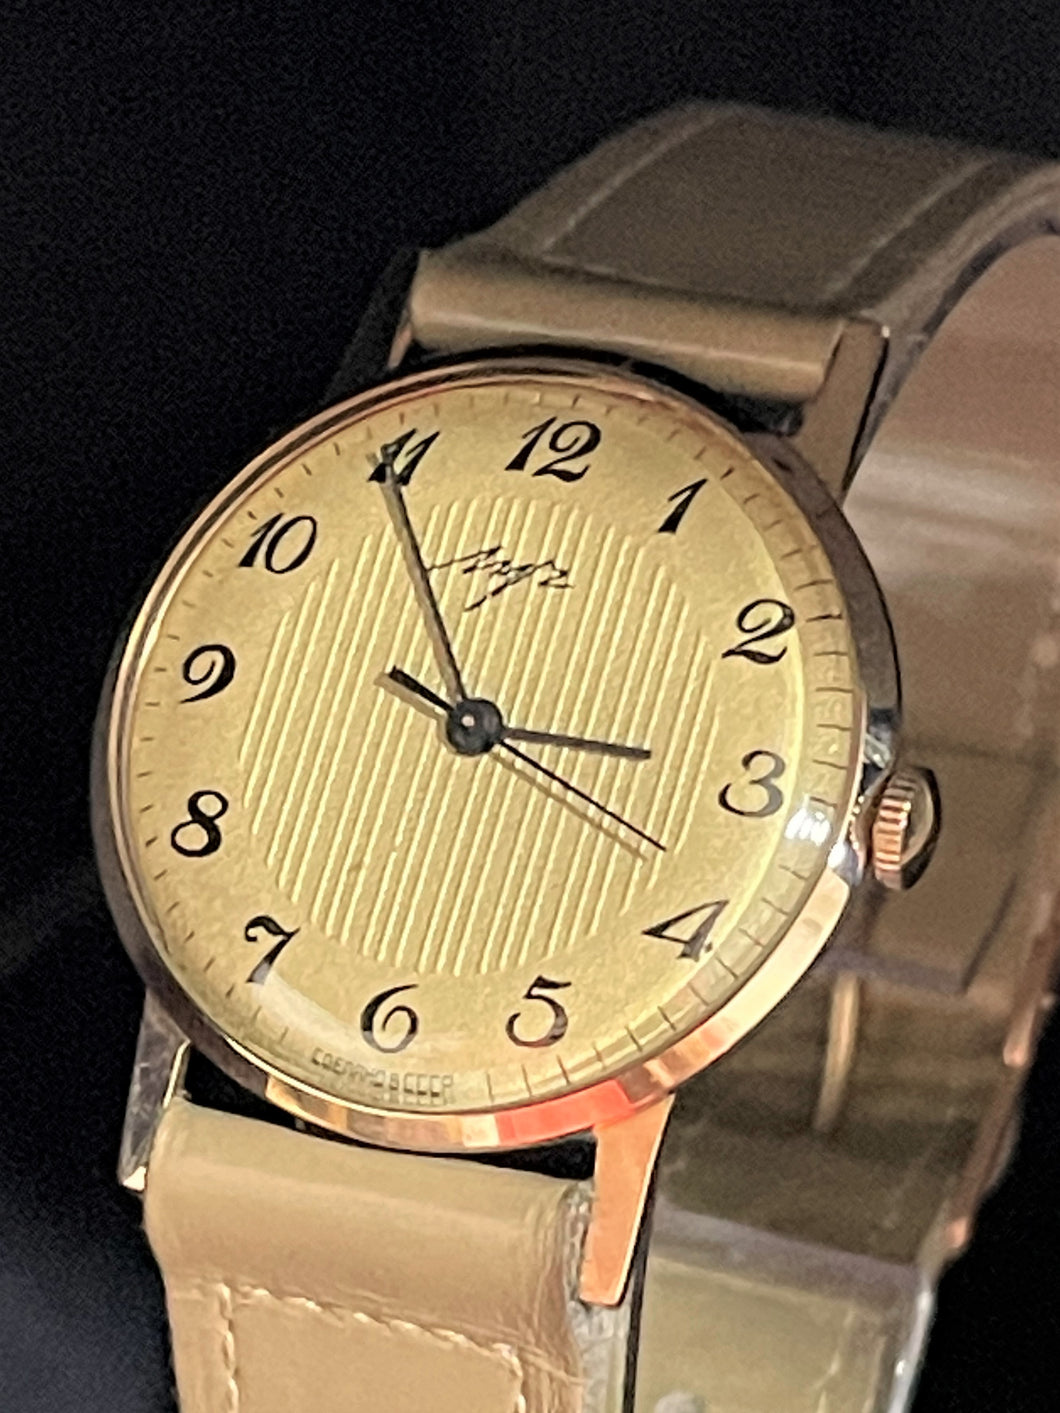 Preowned Russian Watch,14ct solid Rose Gold